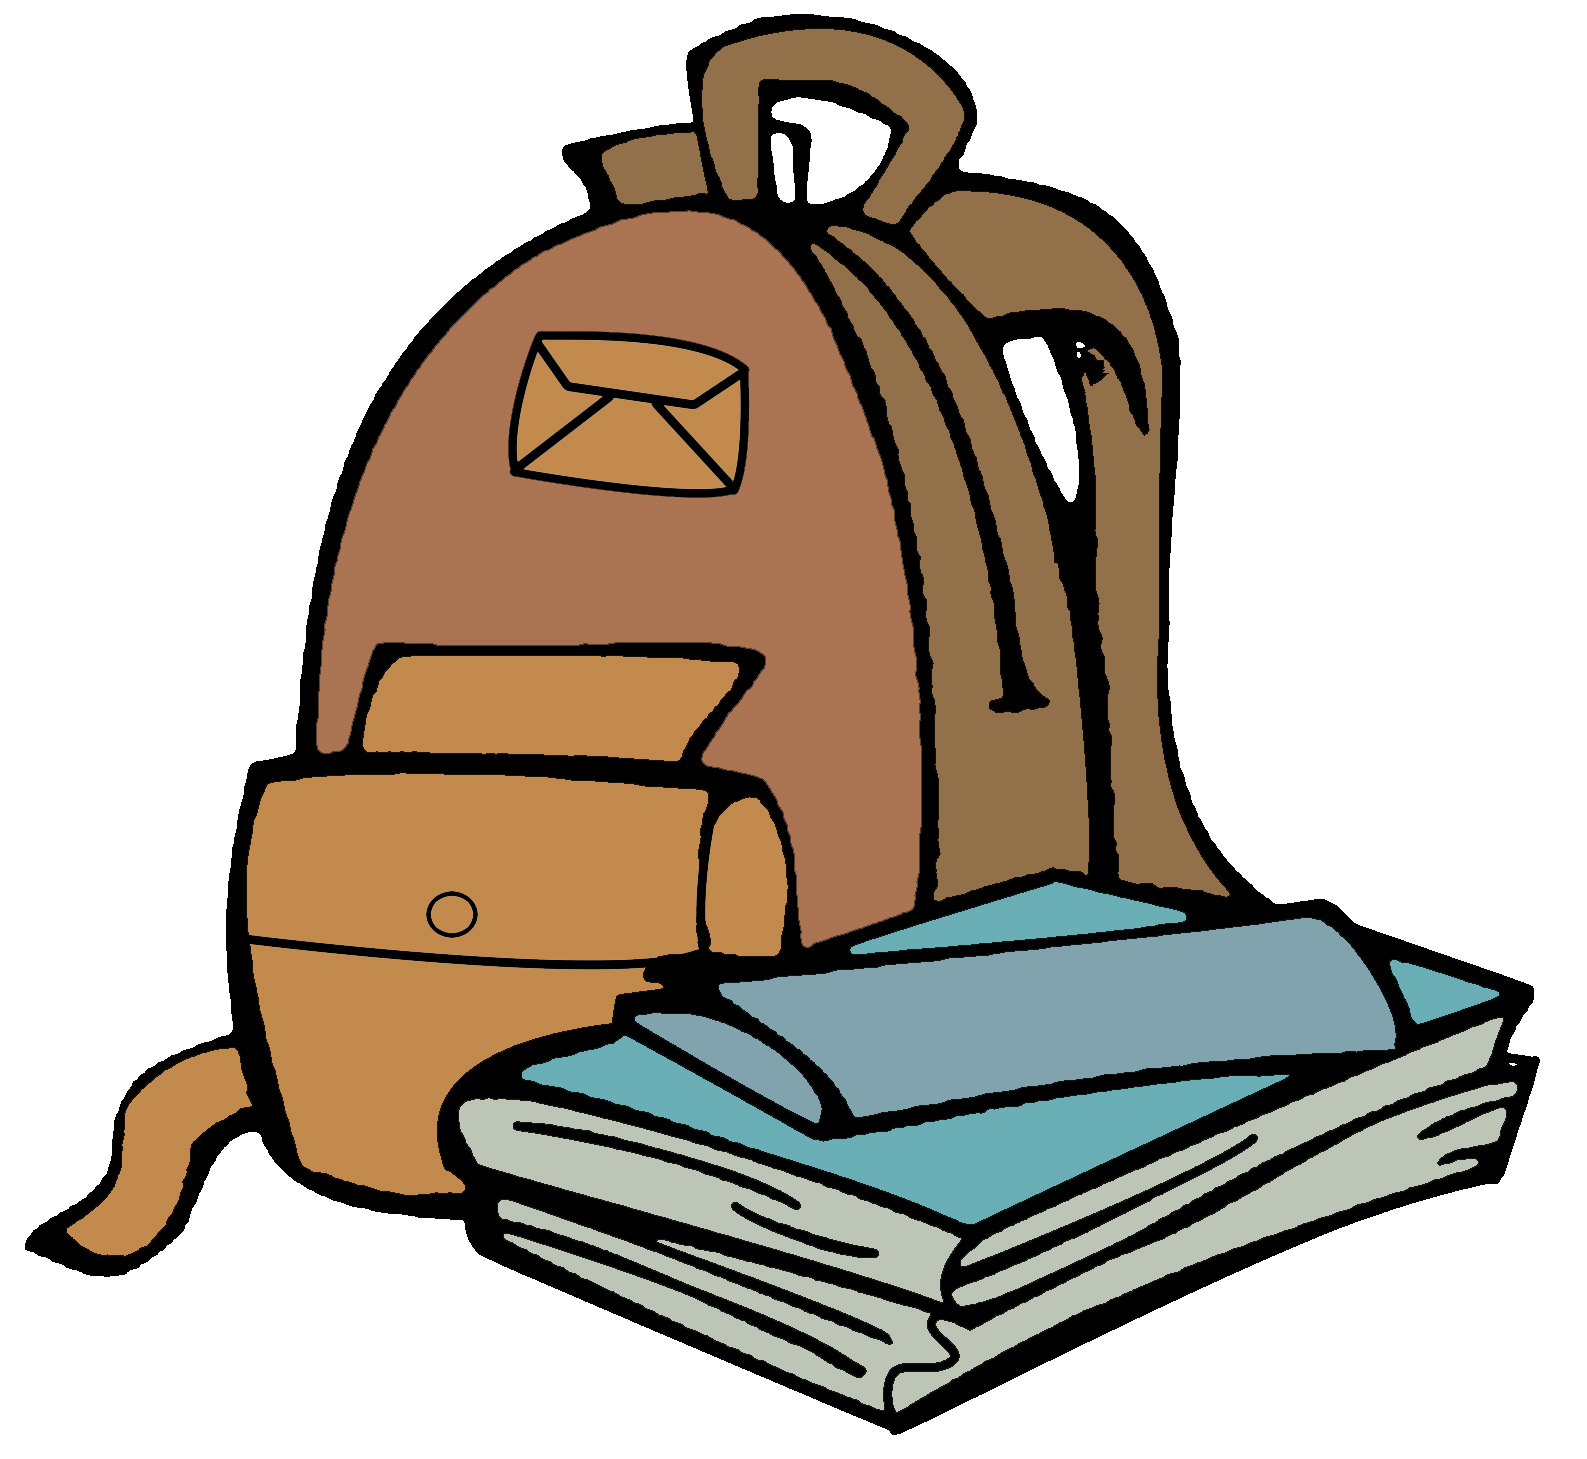 Backpack clipart image clip art image of a red backpack image